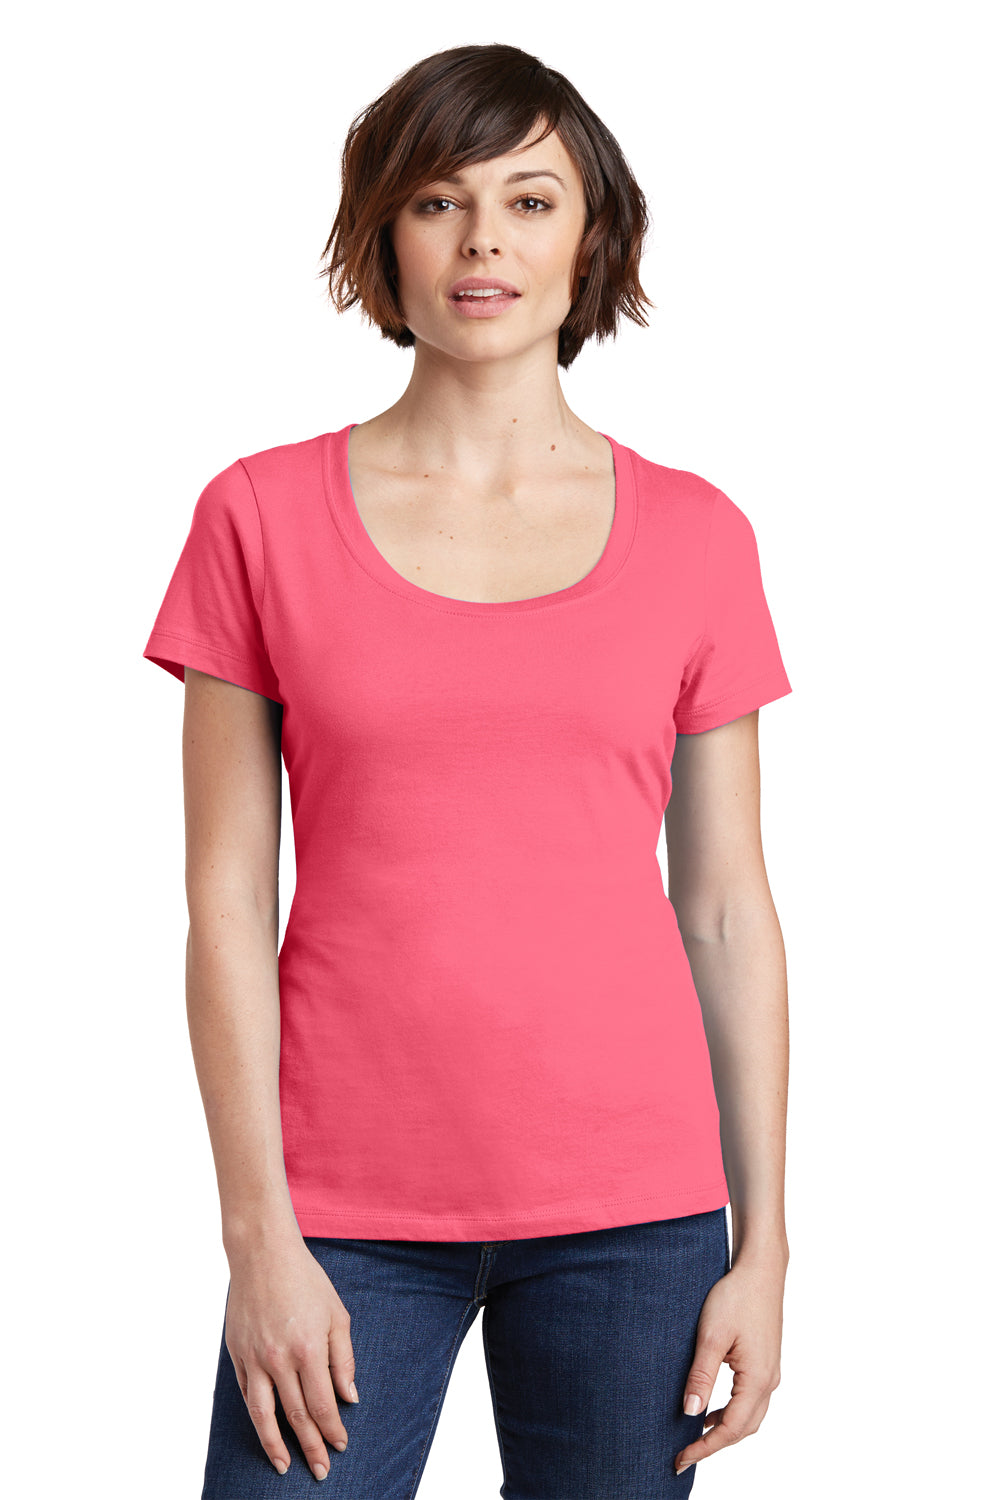 District DM106L Womens Perfect Weight Short Sleeve Scoop Neck T-Shirt Coral Pink Front